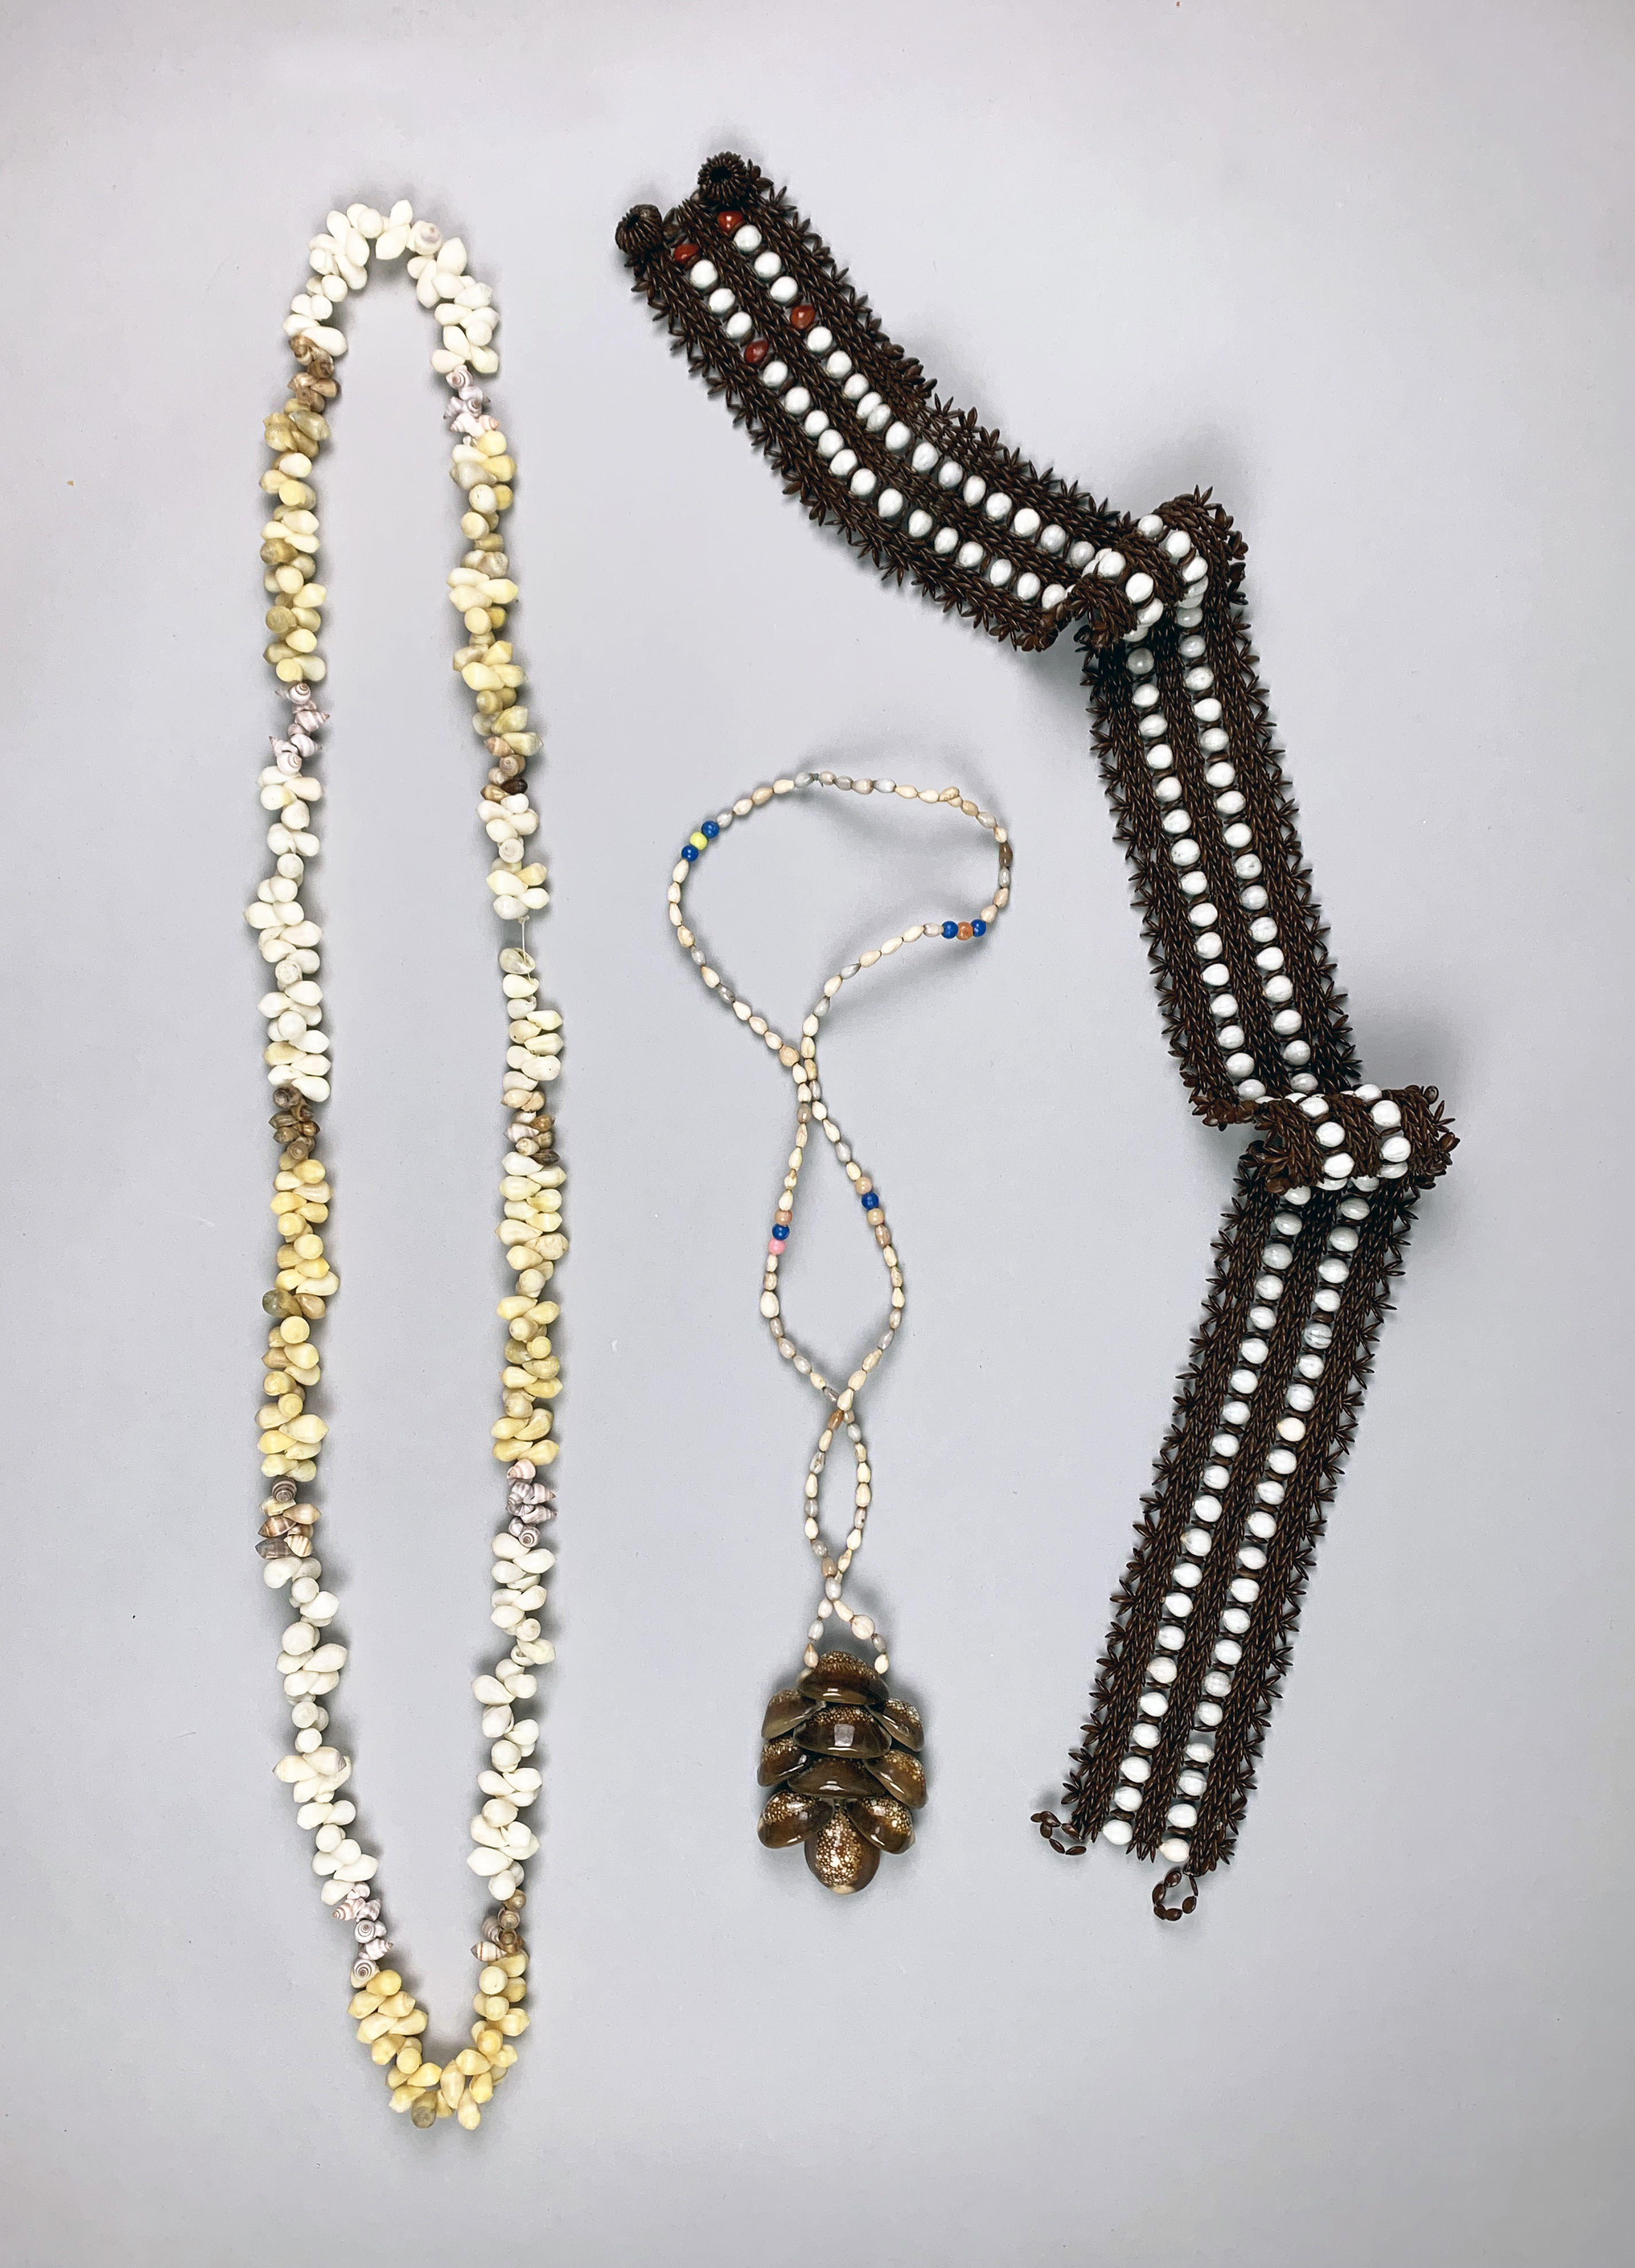 TWO SOLOMON ISLANDS SEASHELL NECKLACES AND A SEASHELL BELT. Provenance: Private English